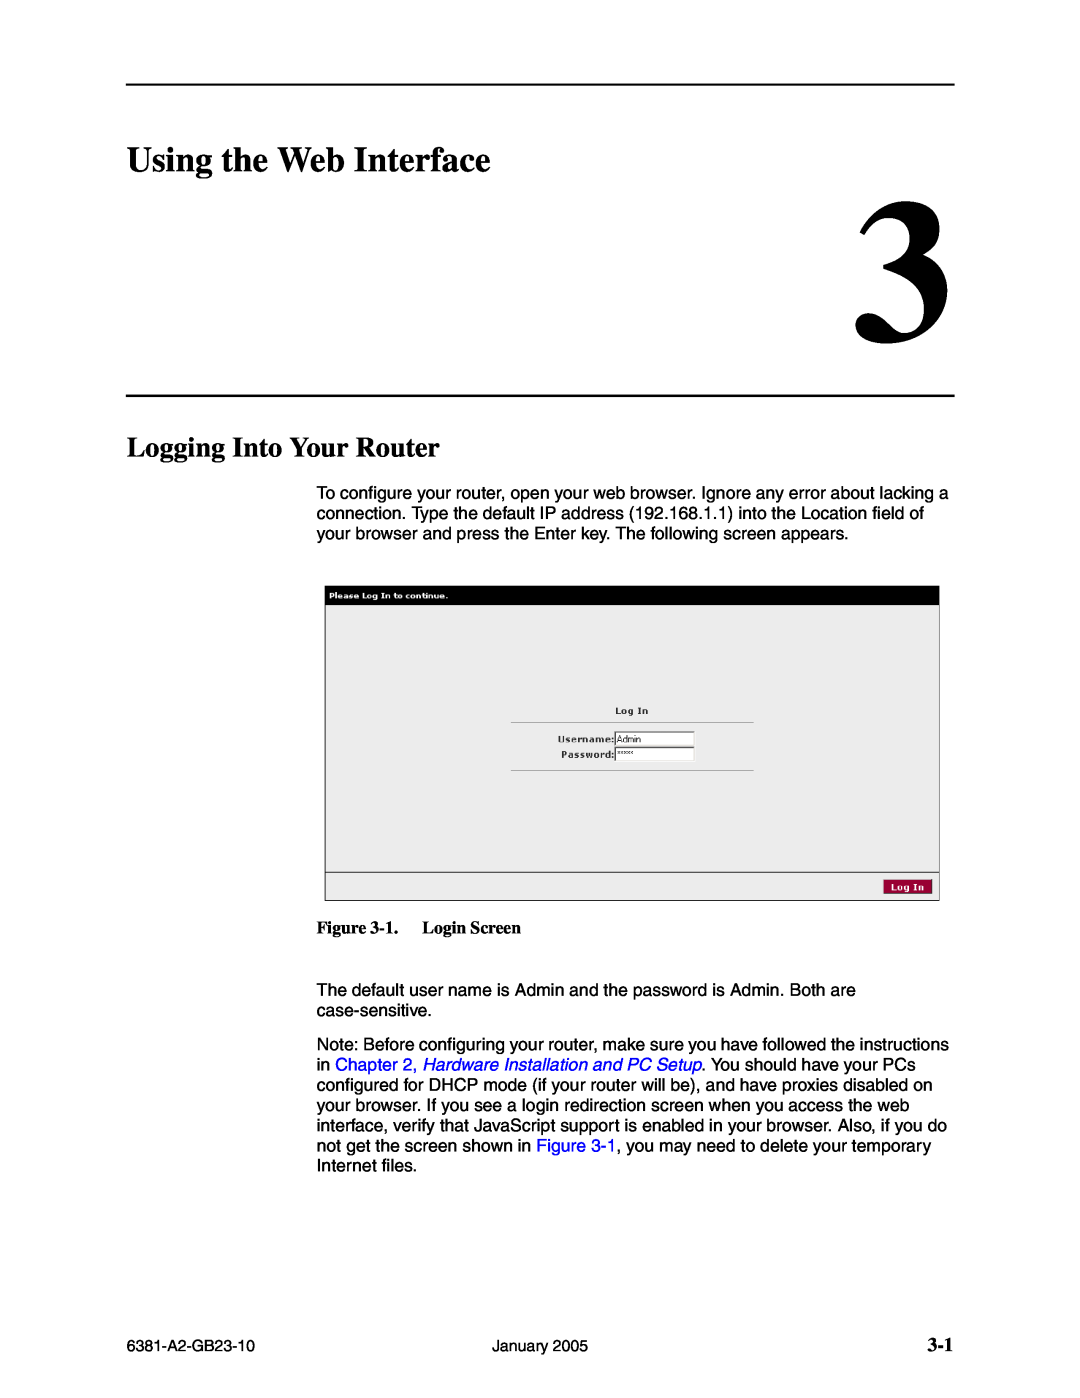 Paradyne 6381-A3 manual Using the Web Interface, Logging Into Your Router, 1. Login Screen 